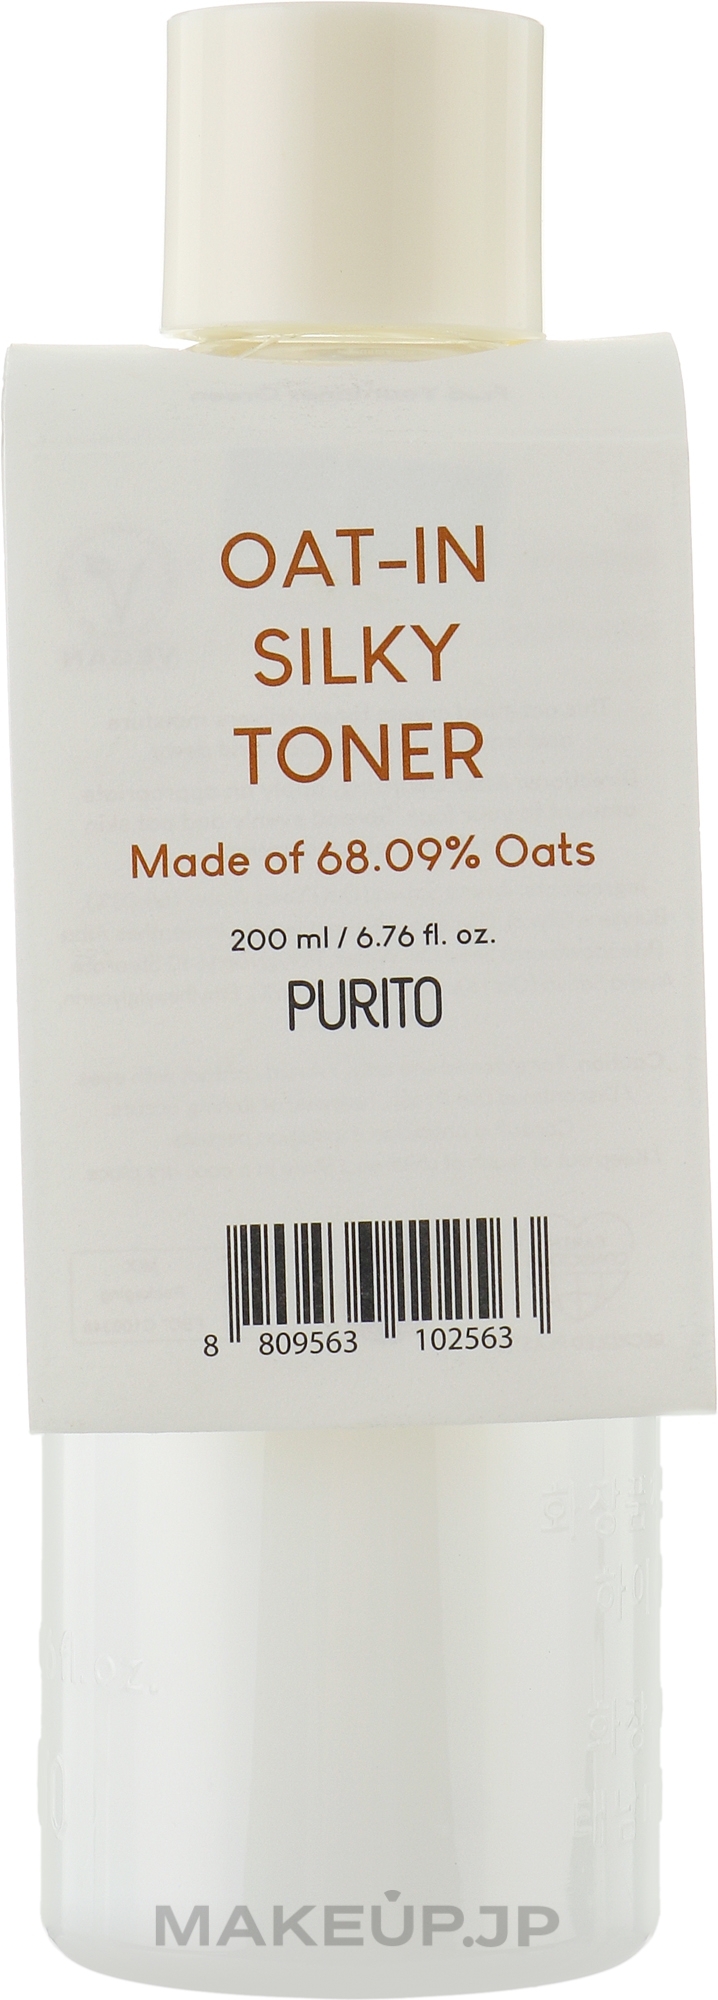 Oat Seed Soothing Toner - Purito Oat-in Silky Toner — photo 200 ml